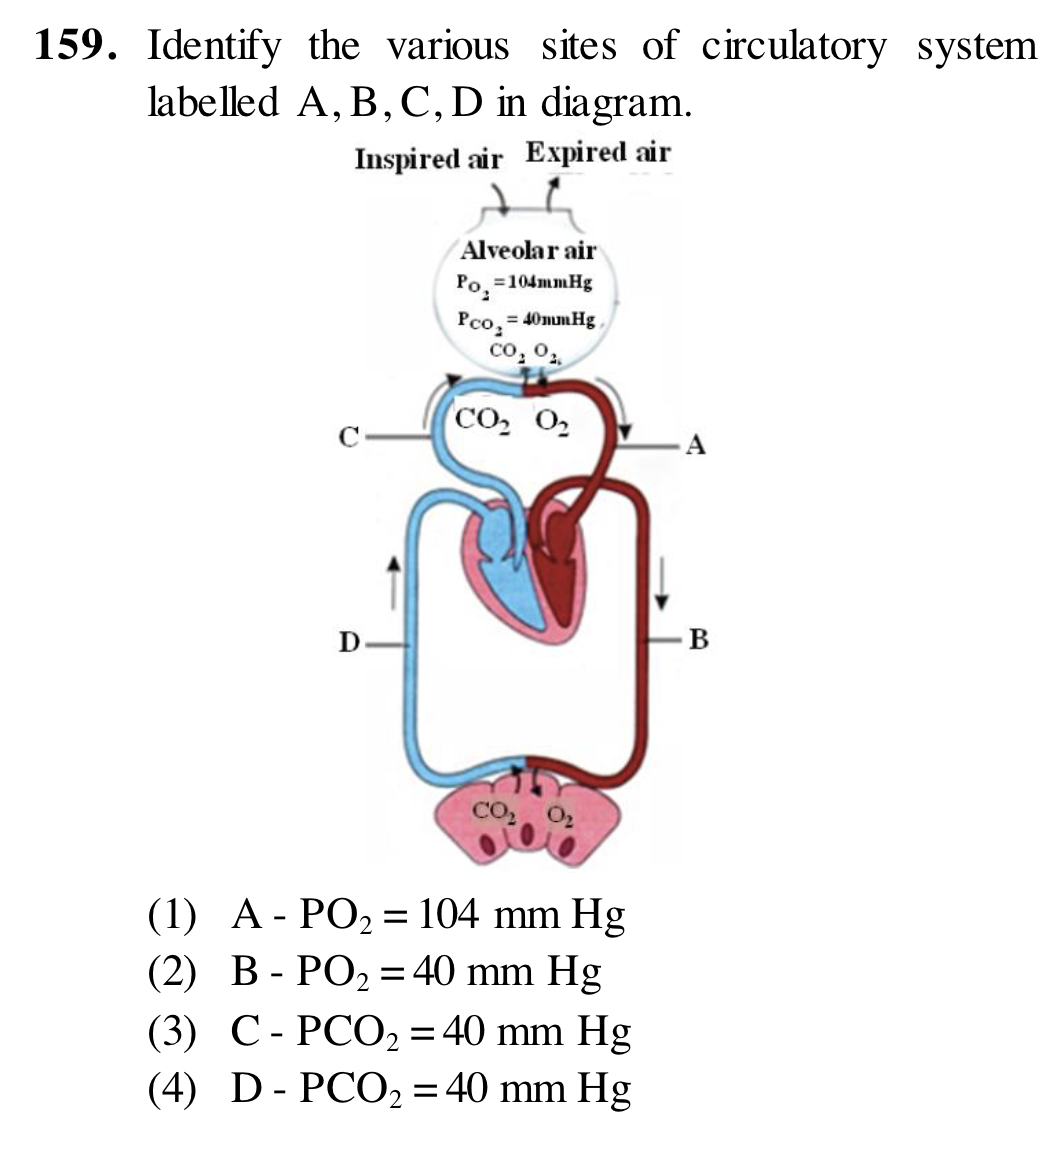 Identify the various sites of circulatory system labelled A, B, C, D i